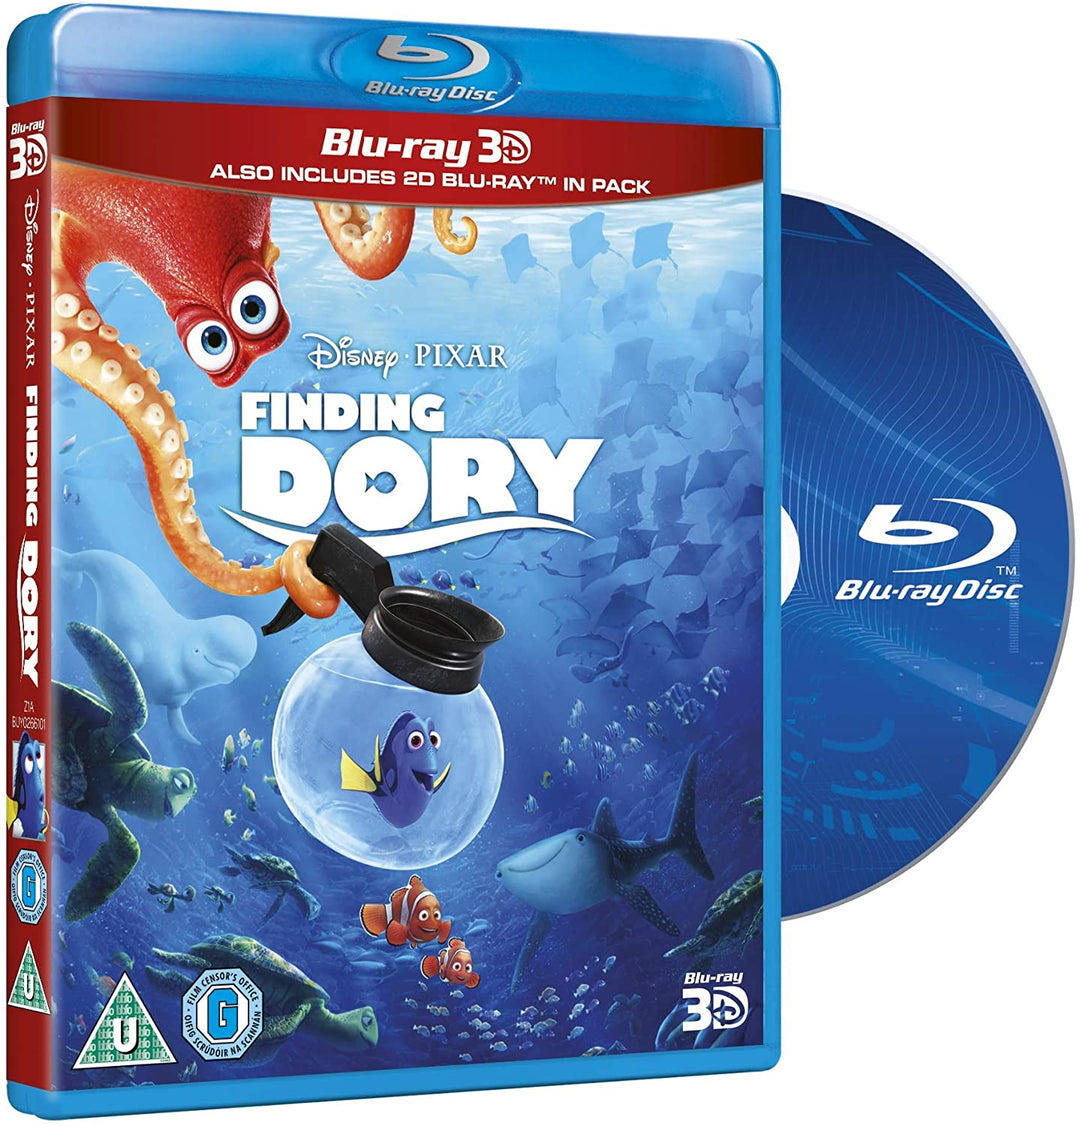 Dory finden [Blu-ray 3D] [2017]